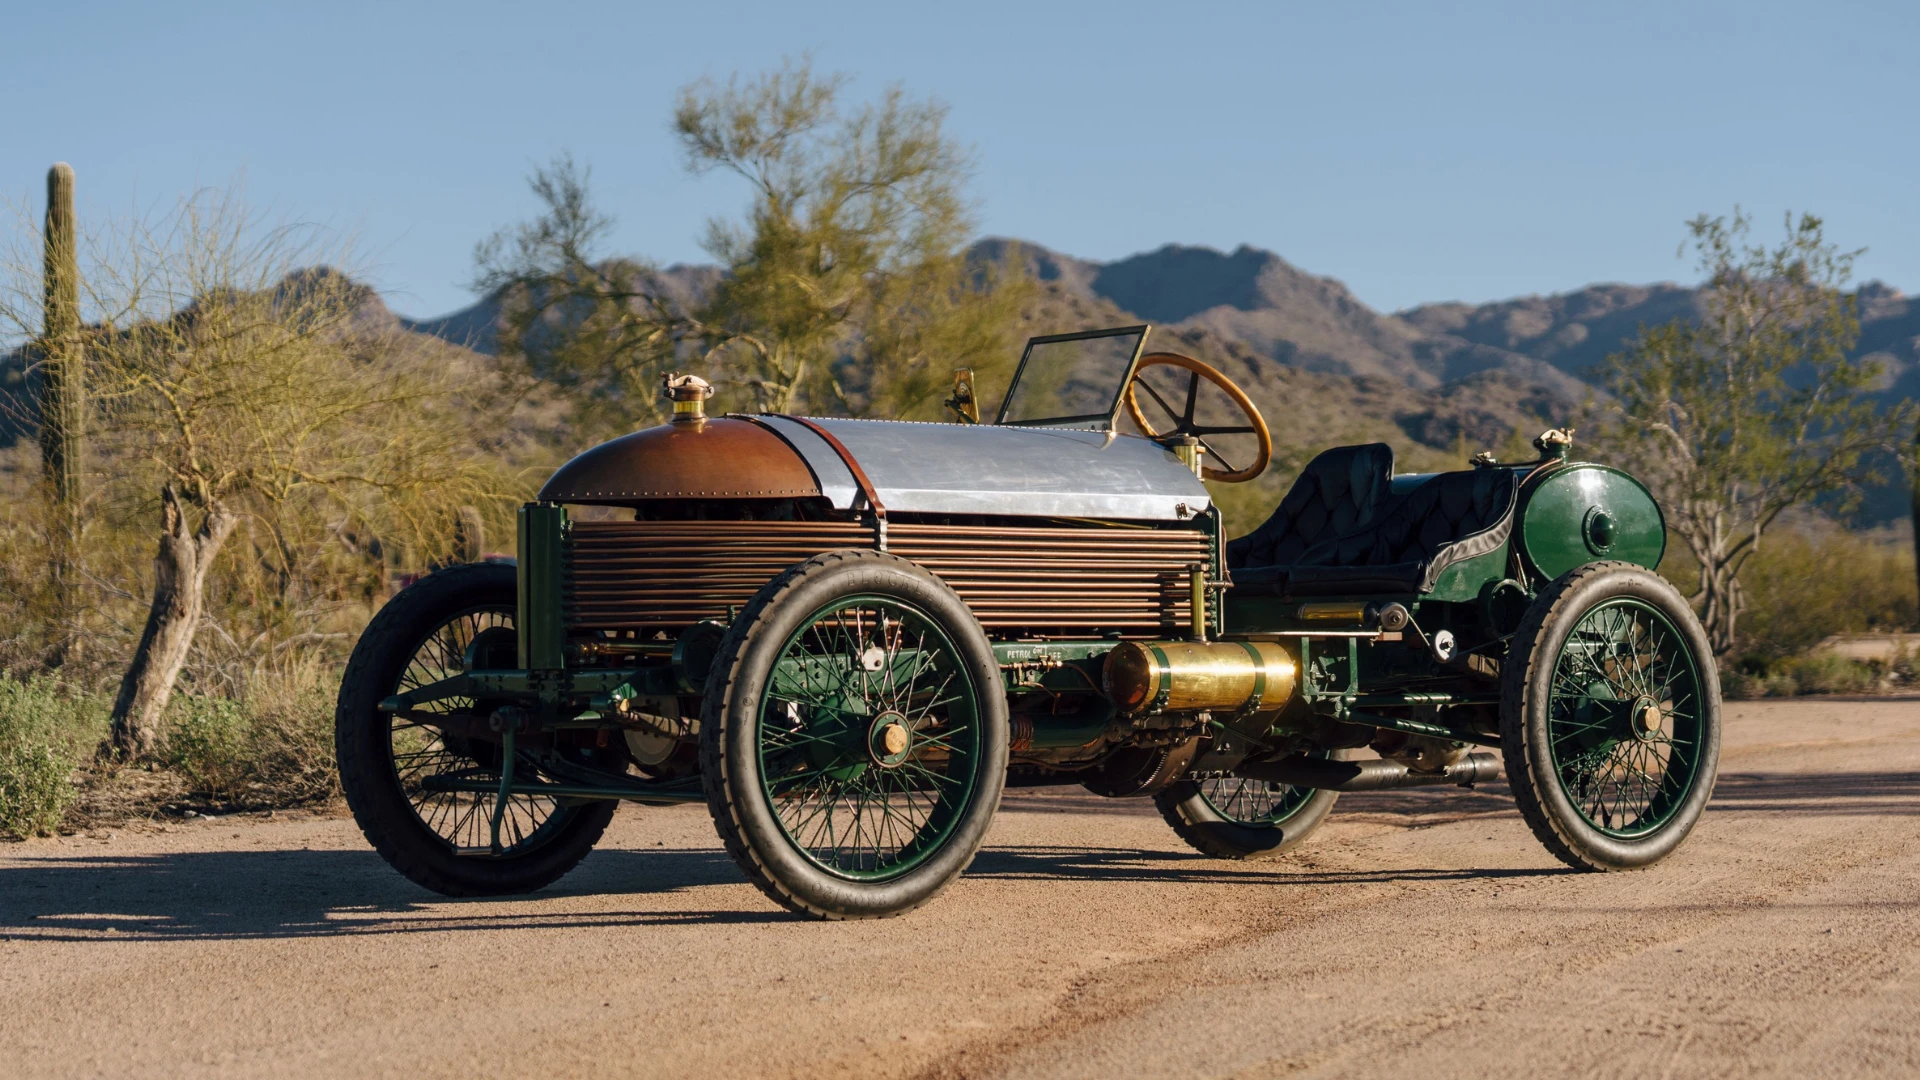 This Vintage Race Car was America's First to Exceed 100 MPH